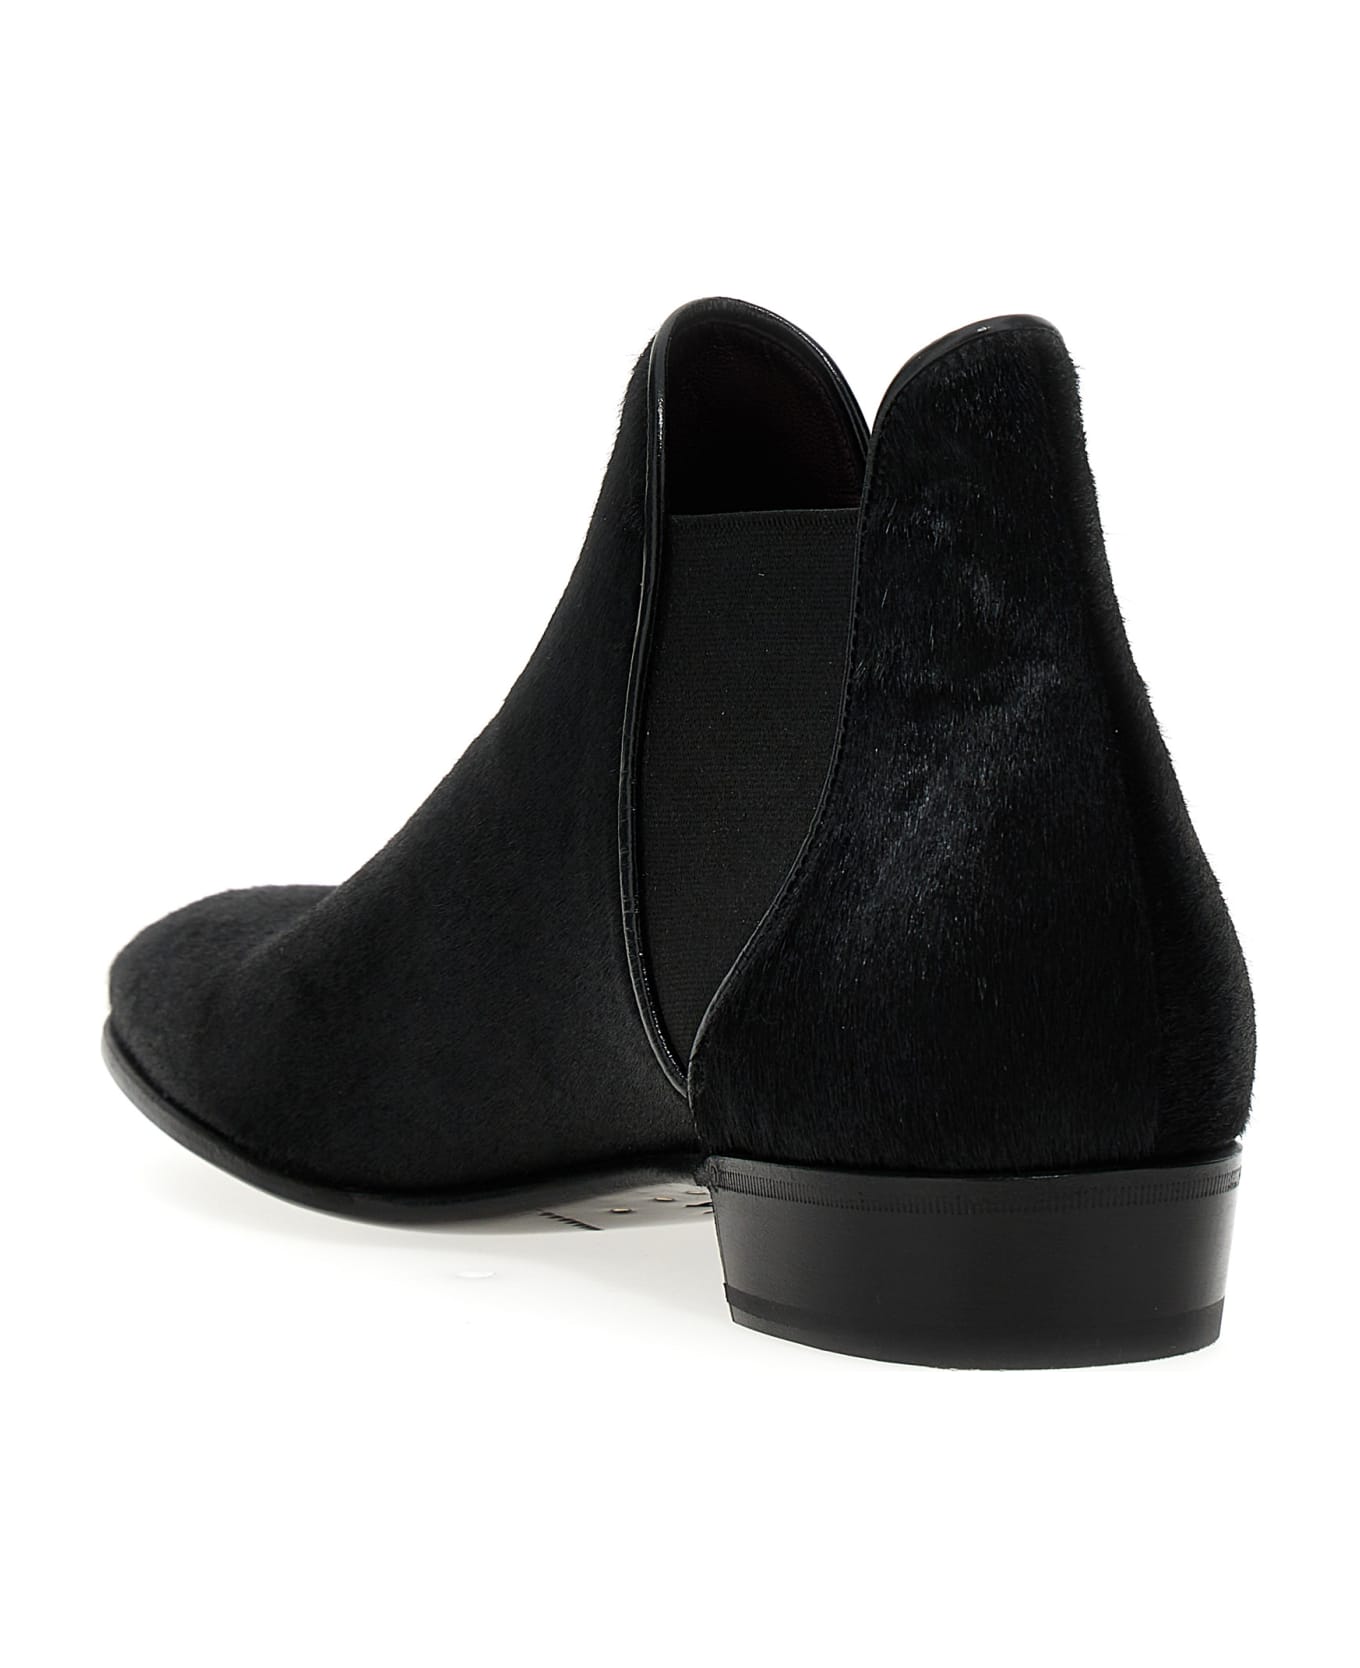 Lidfort Calf Hair Ankle Boots - Black   ブーツ